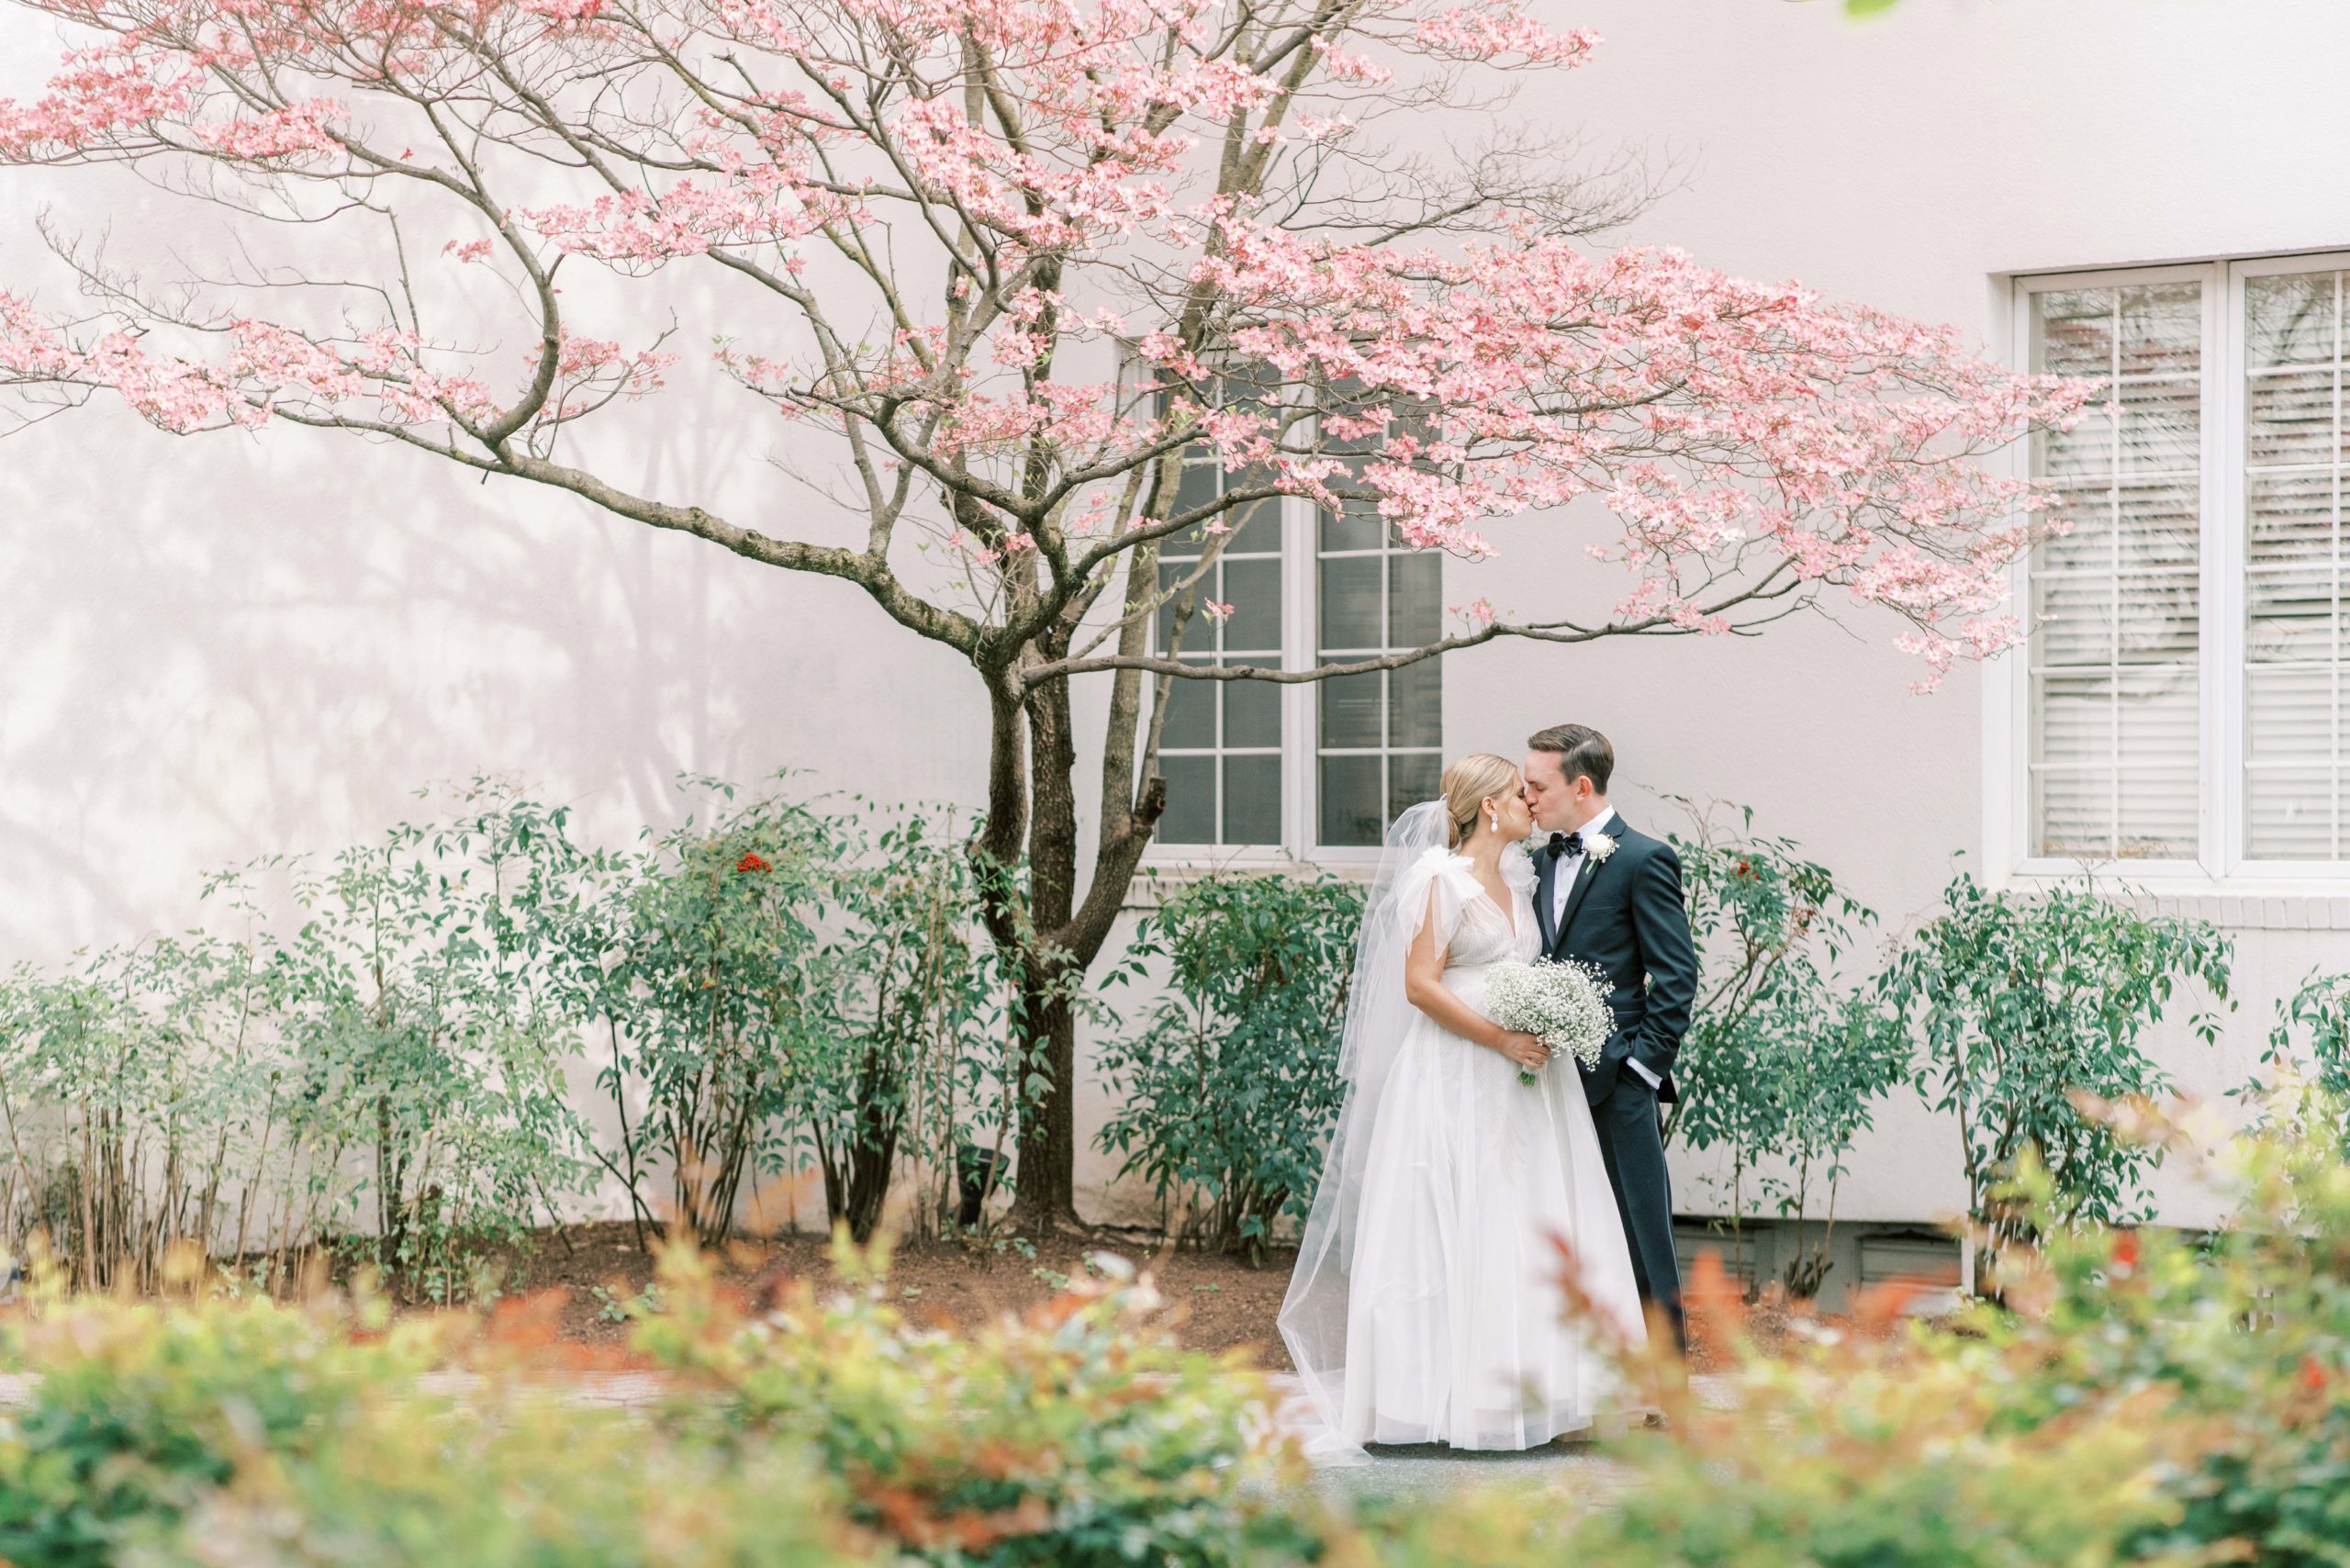 An elegant, black-tie wedding at the Congressional Country Club outside of Washington, DC featuring photography by Alicia Lacey. 